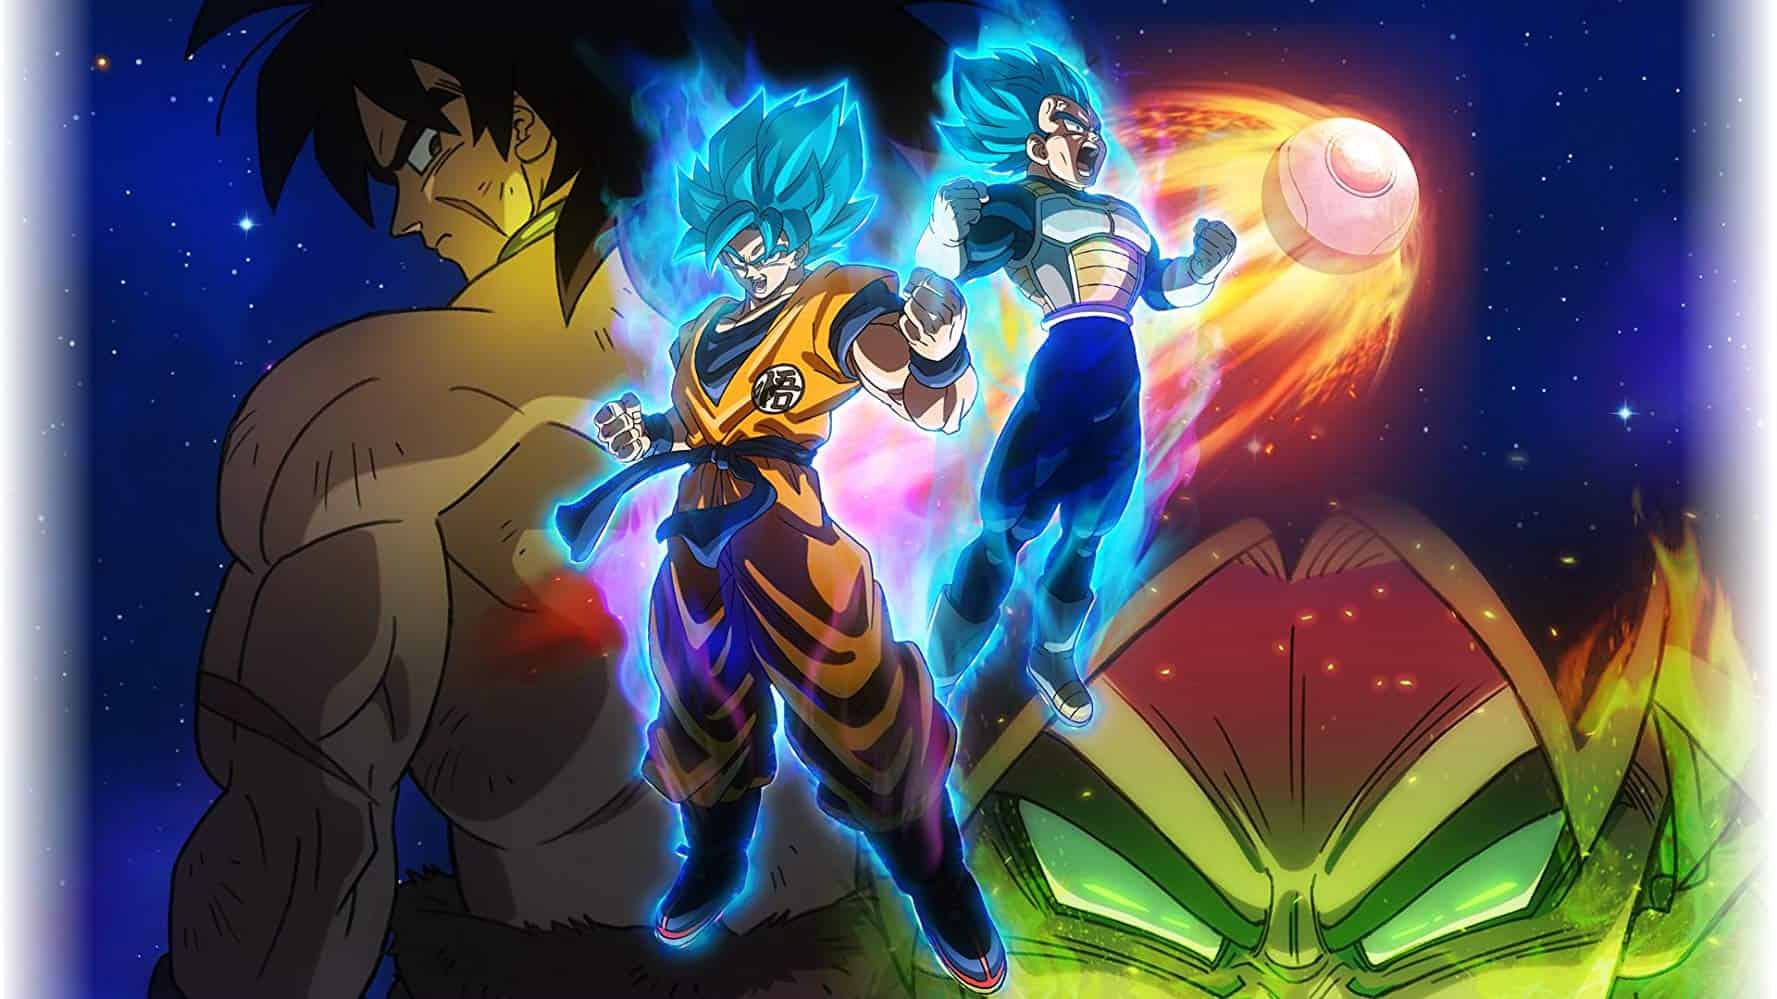 Dragon Ball Z: Bio-Broly Review. The final Broly movie! I was